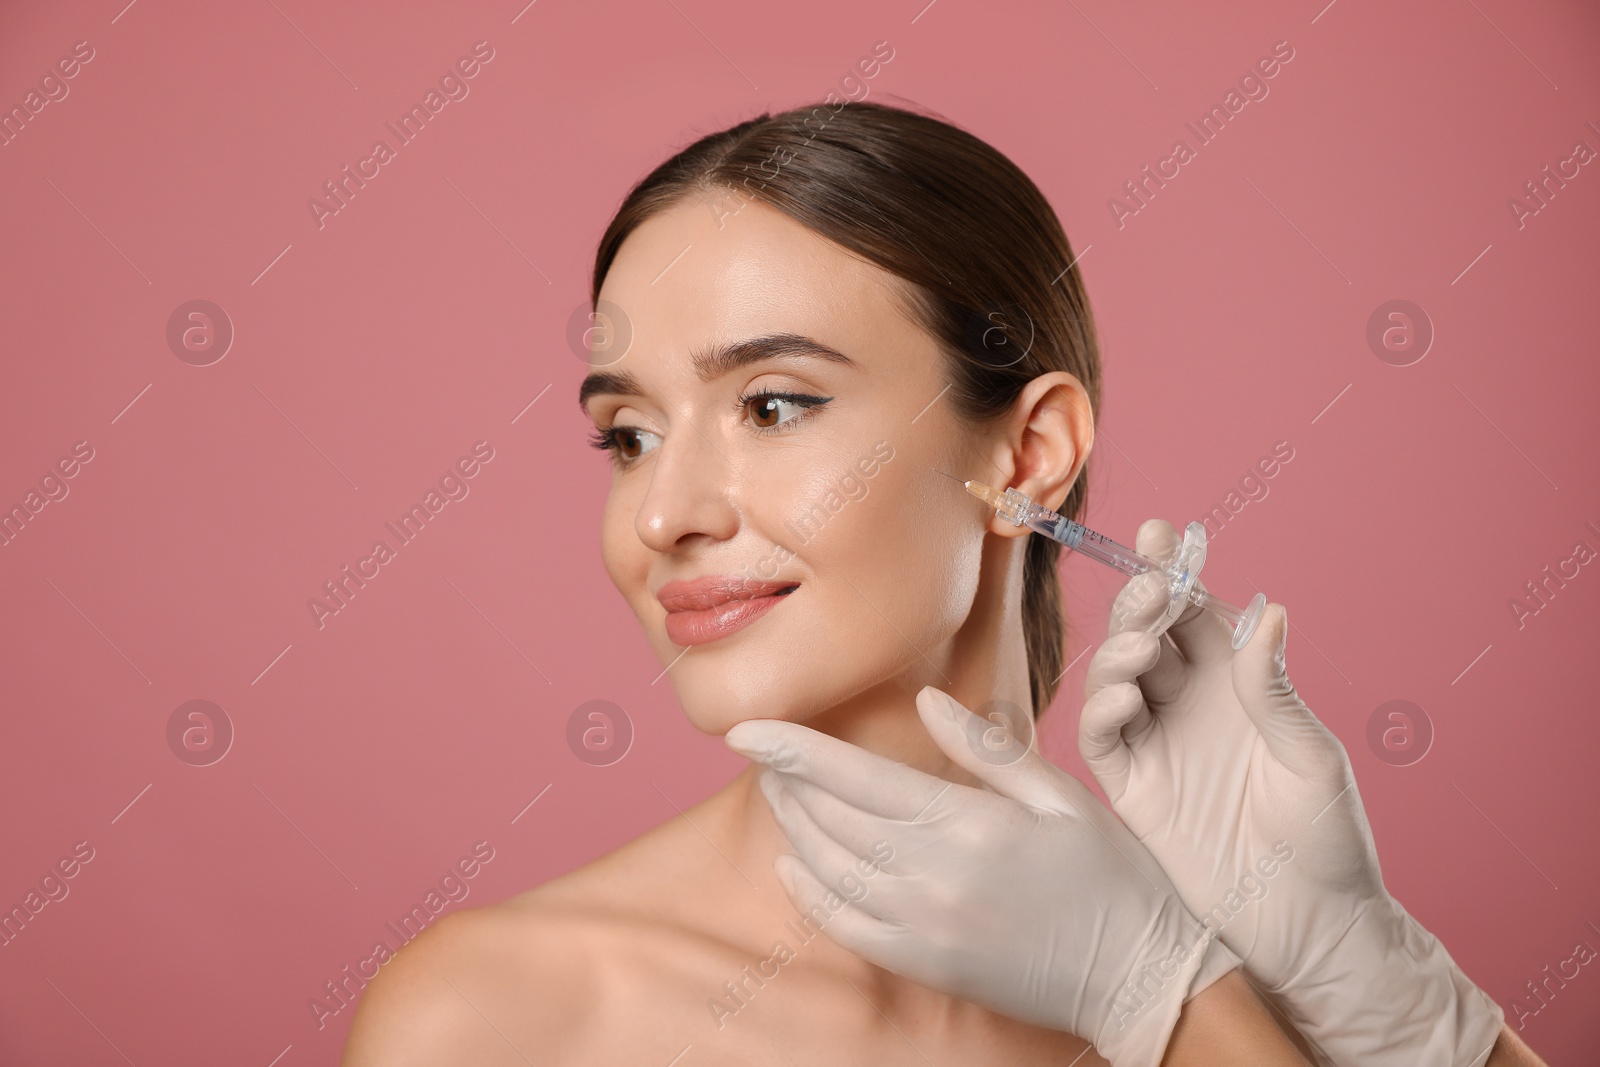 Photo of Beautiful woman getting facial injection on pink background. Cosmetic surgery